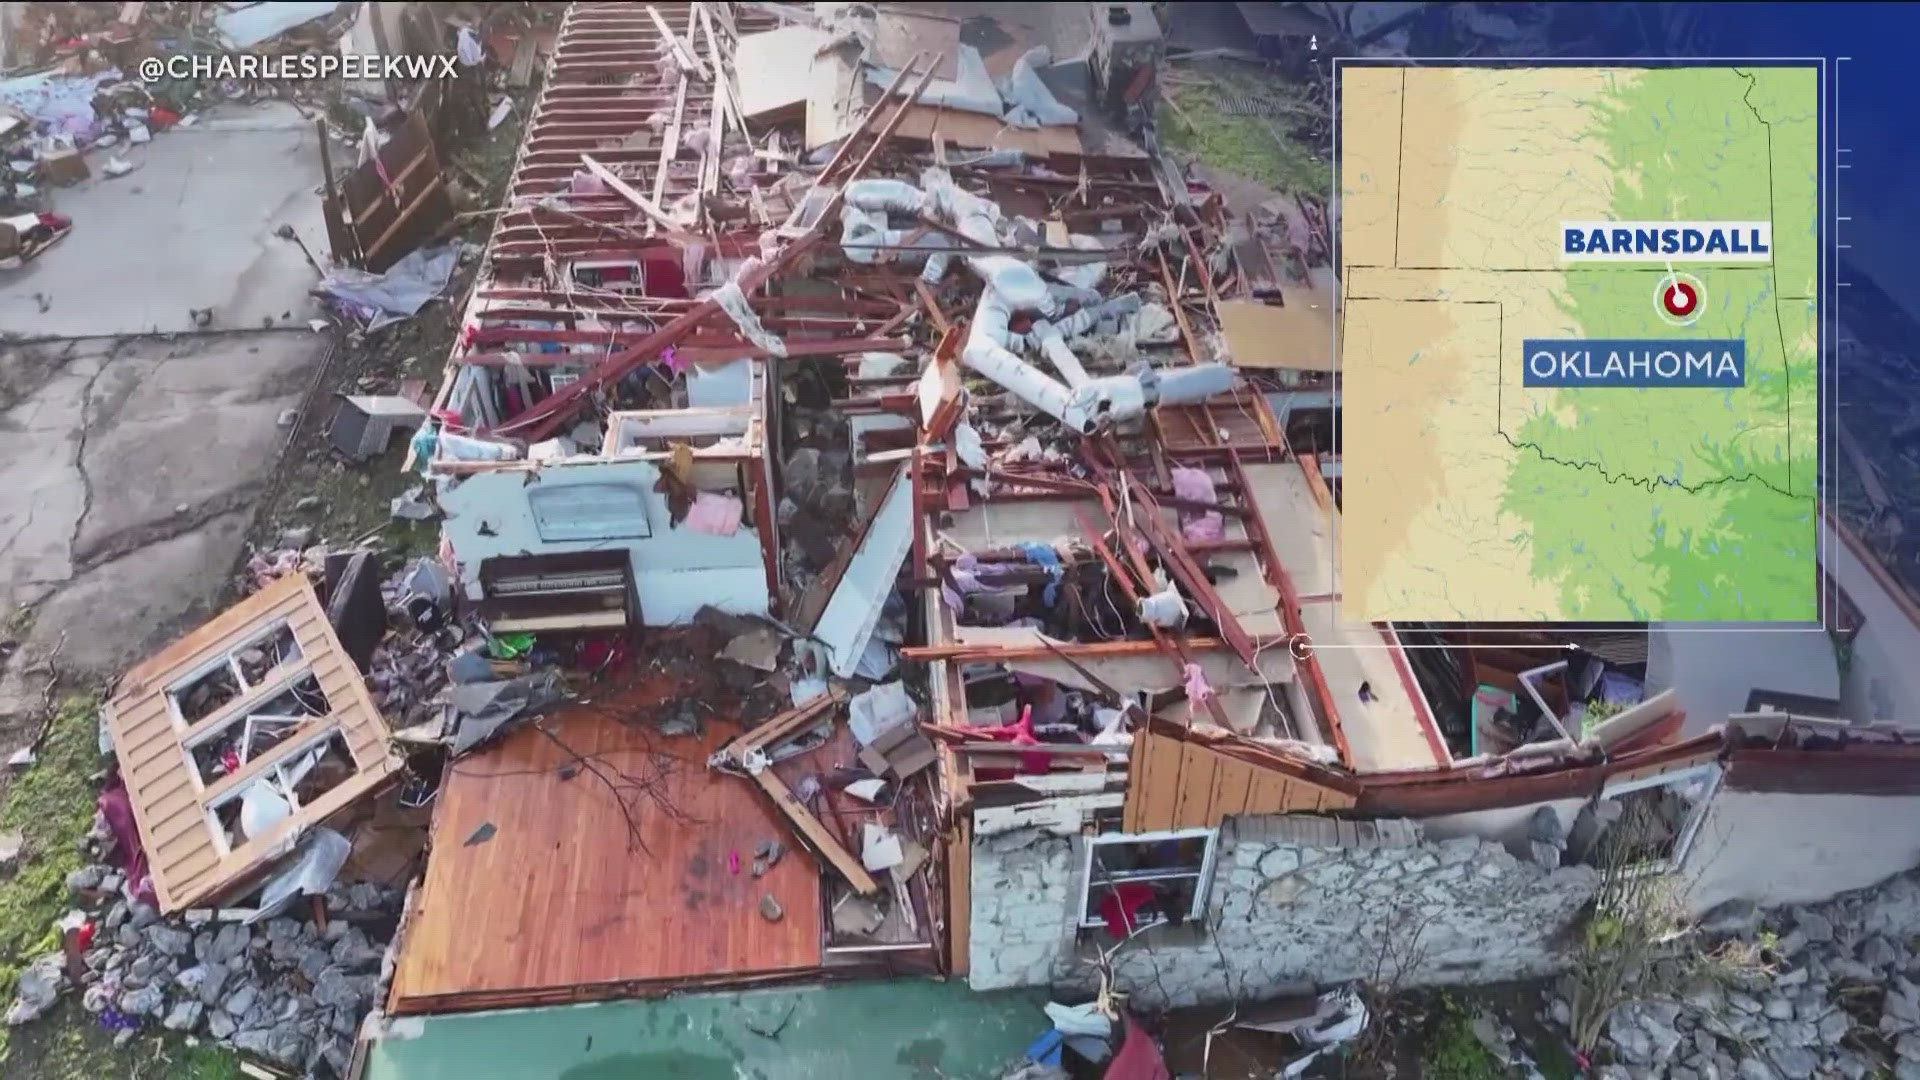 View the footage of the tornado aftermath in Oklahoma.